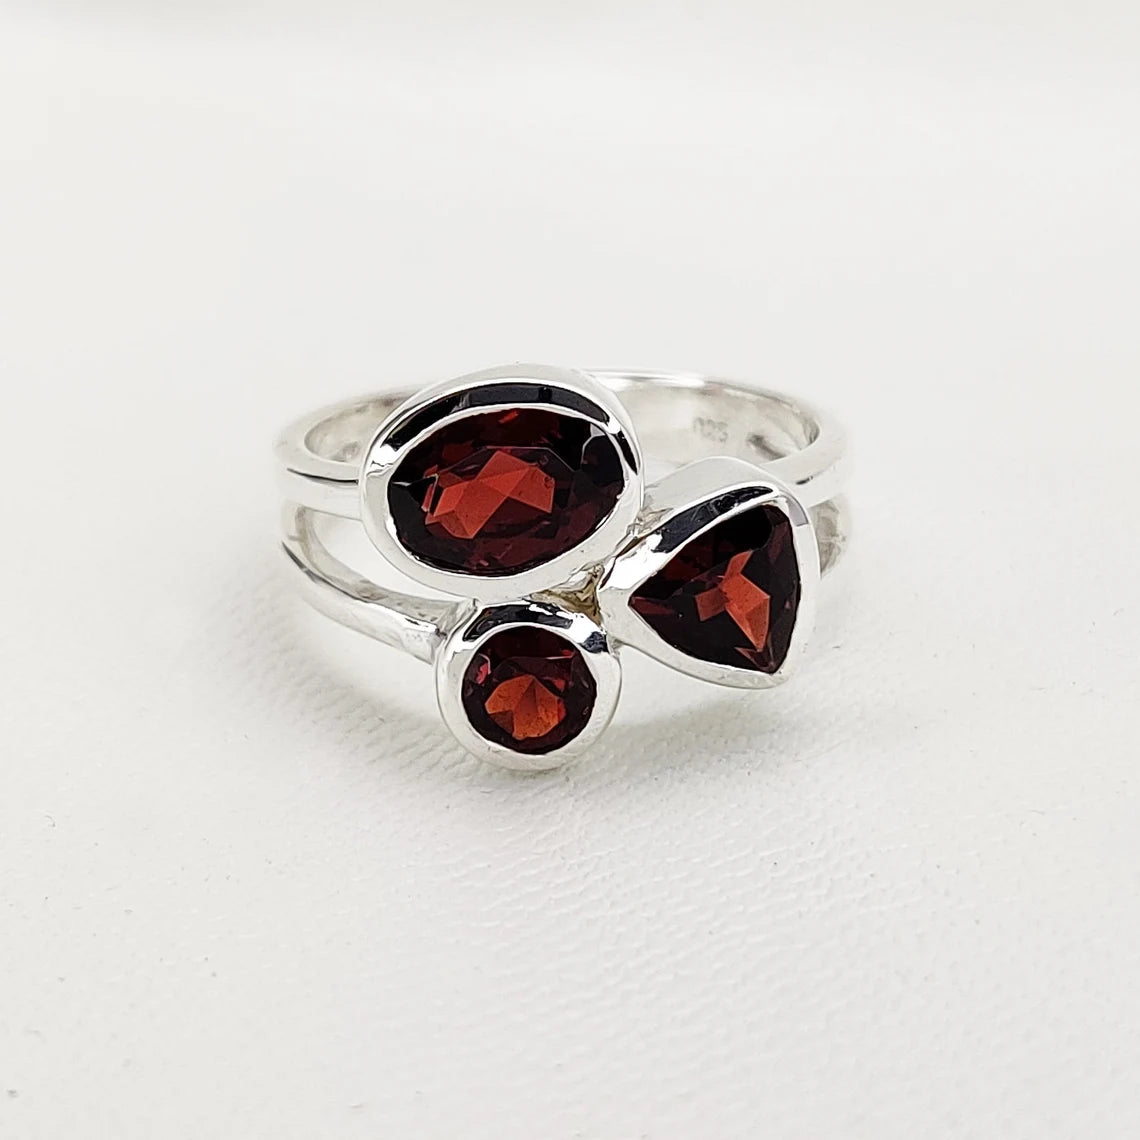 Sterling Silver Natural Garnet Ring - Engagement, Promise, Gemstone Ring, Anniversary, Birthday Valentine's Gift For Her, Girlfriend, Wife